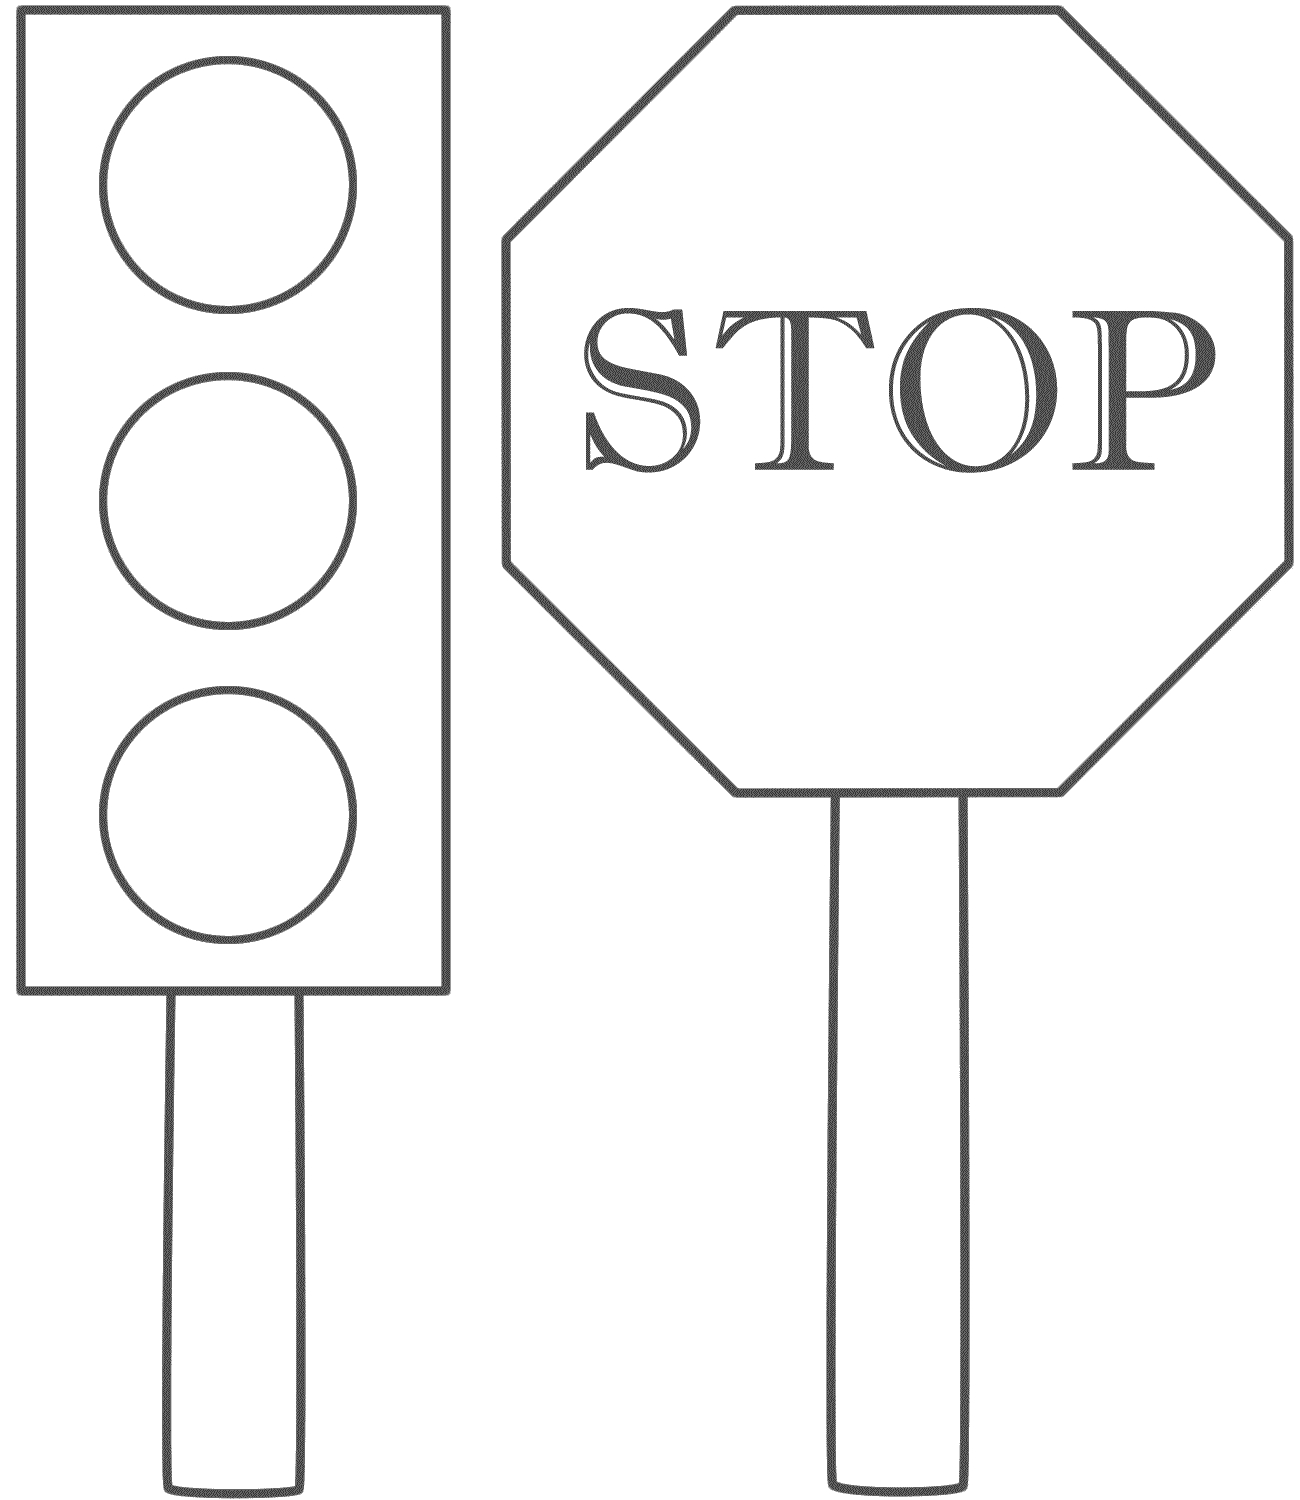 Stoplightcoloringpage Traffic Light And Stop Sign Coloring Pages - Free Printable Stop Sign To Color